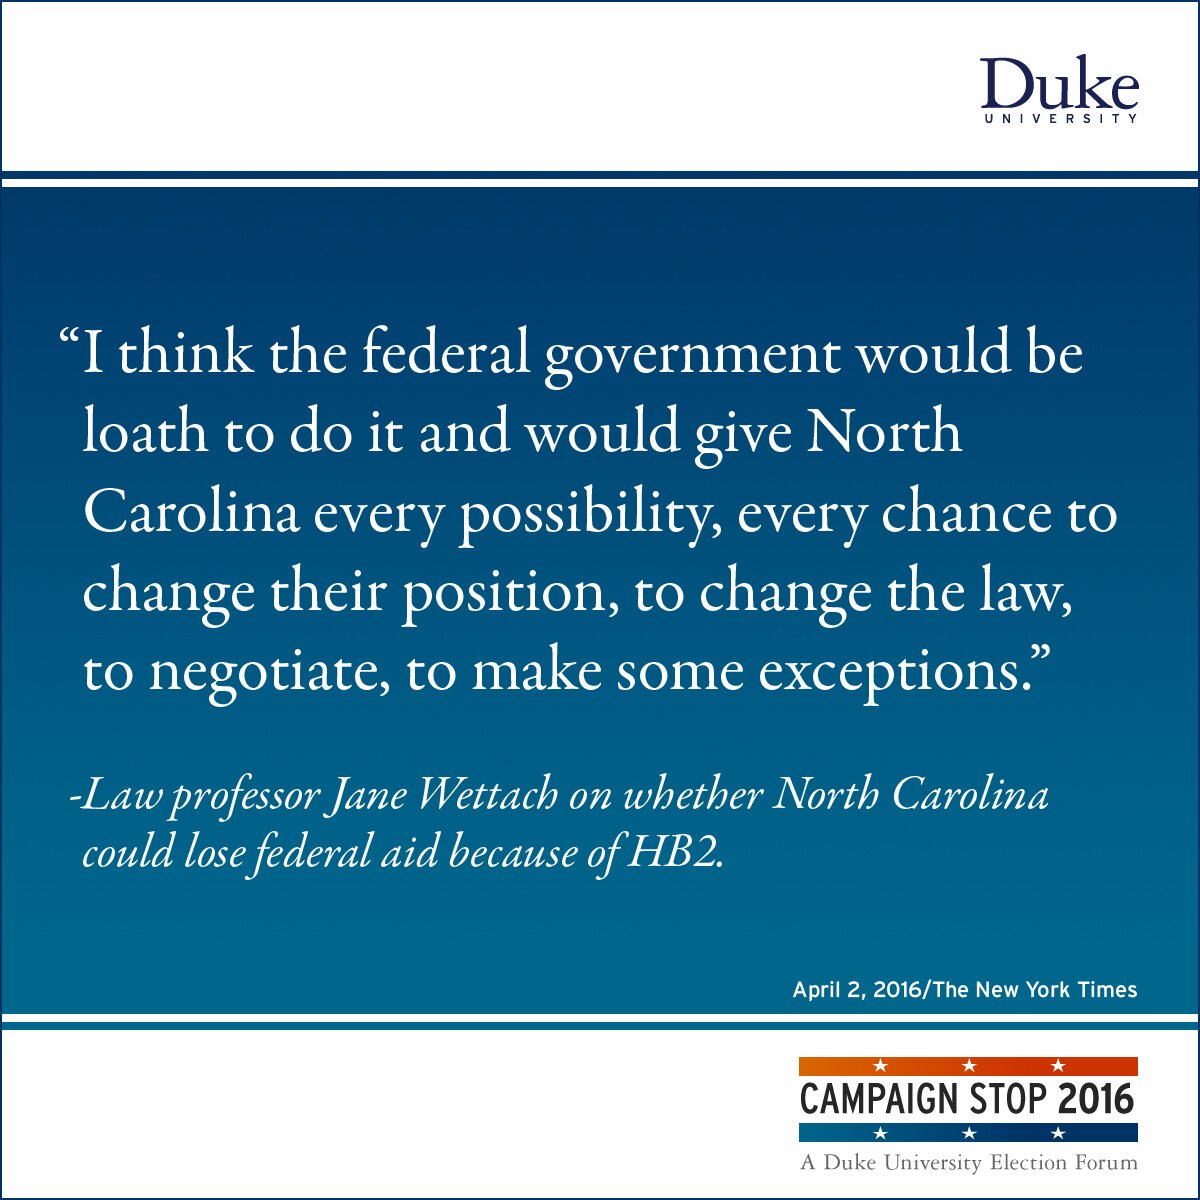 “I think the federal government would be loath to do it and would give North Carolina every possibility, every chance to change their position, to change the law, to negotiate, to make some exceptions.” -Law professor Jane Wettach on whether North Carolina could lose federal aid because of HB2.